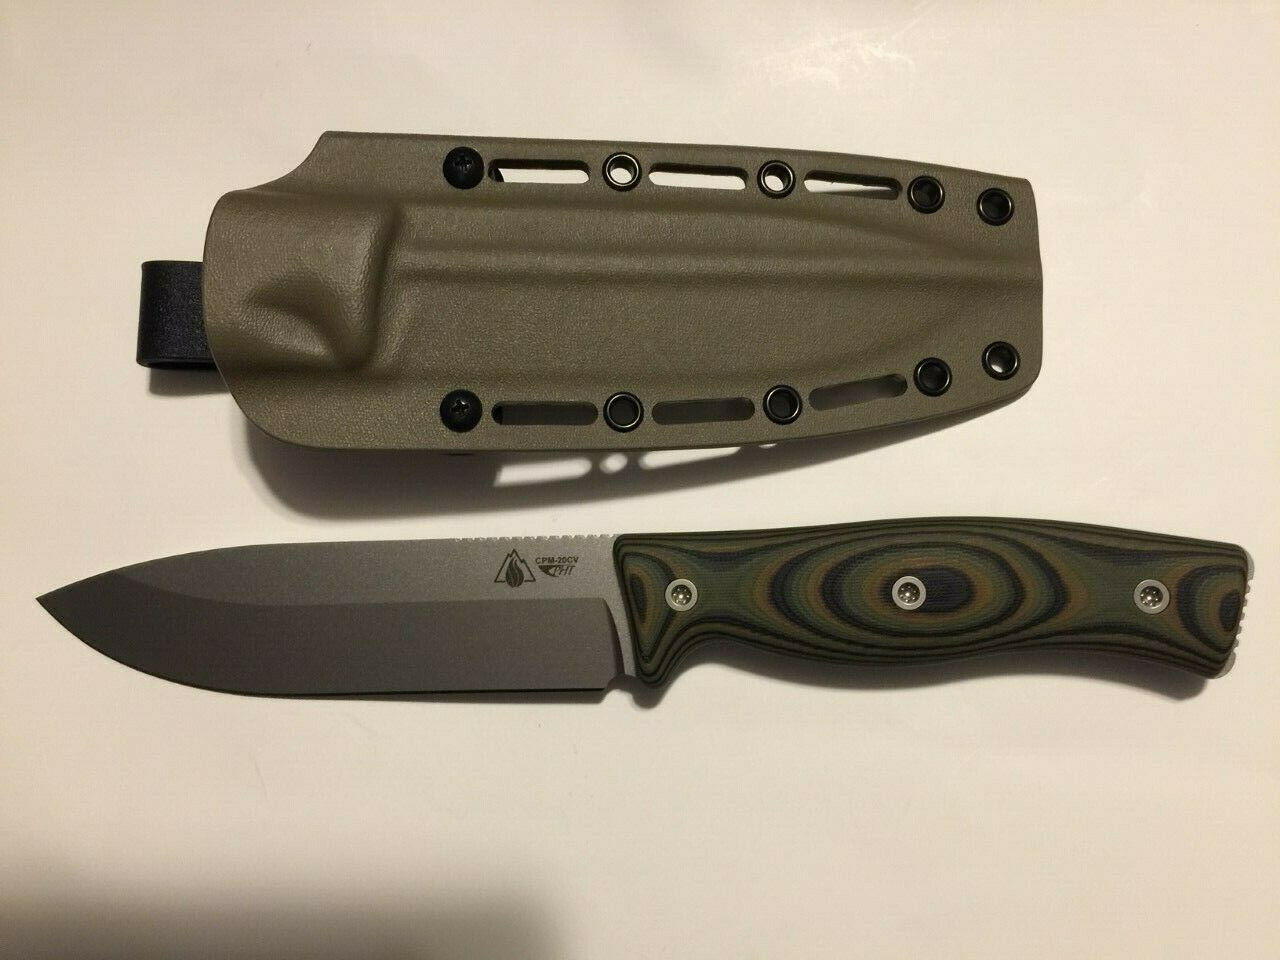 New Survive! Knives Gso 6 Cpm-20cv With Kydex Sheath